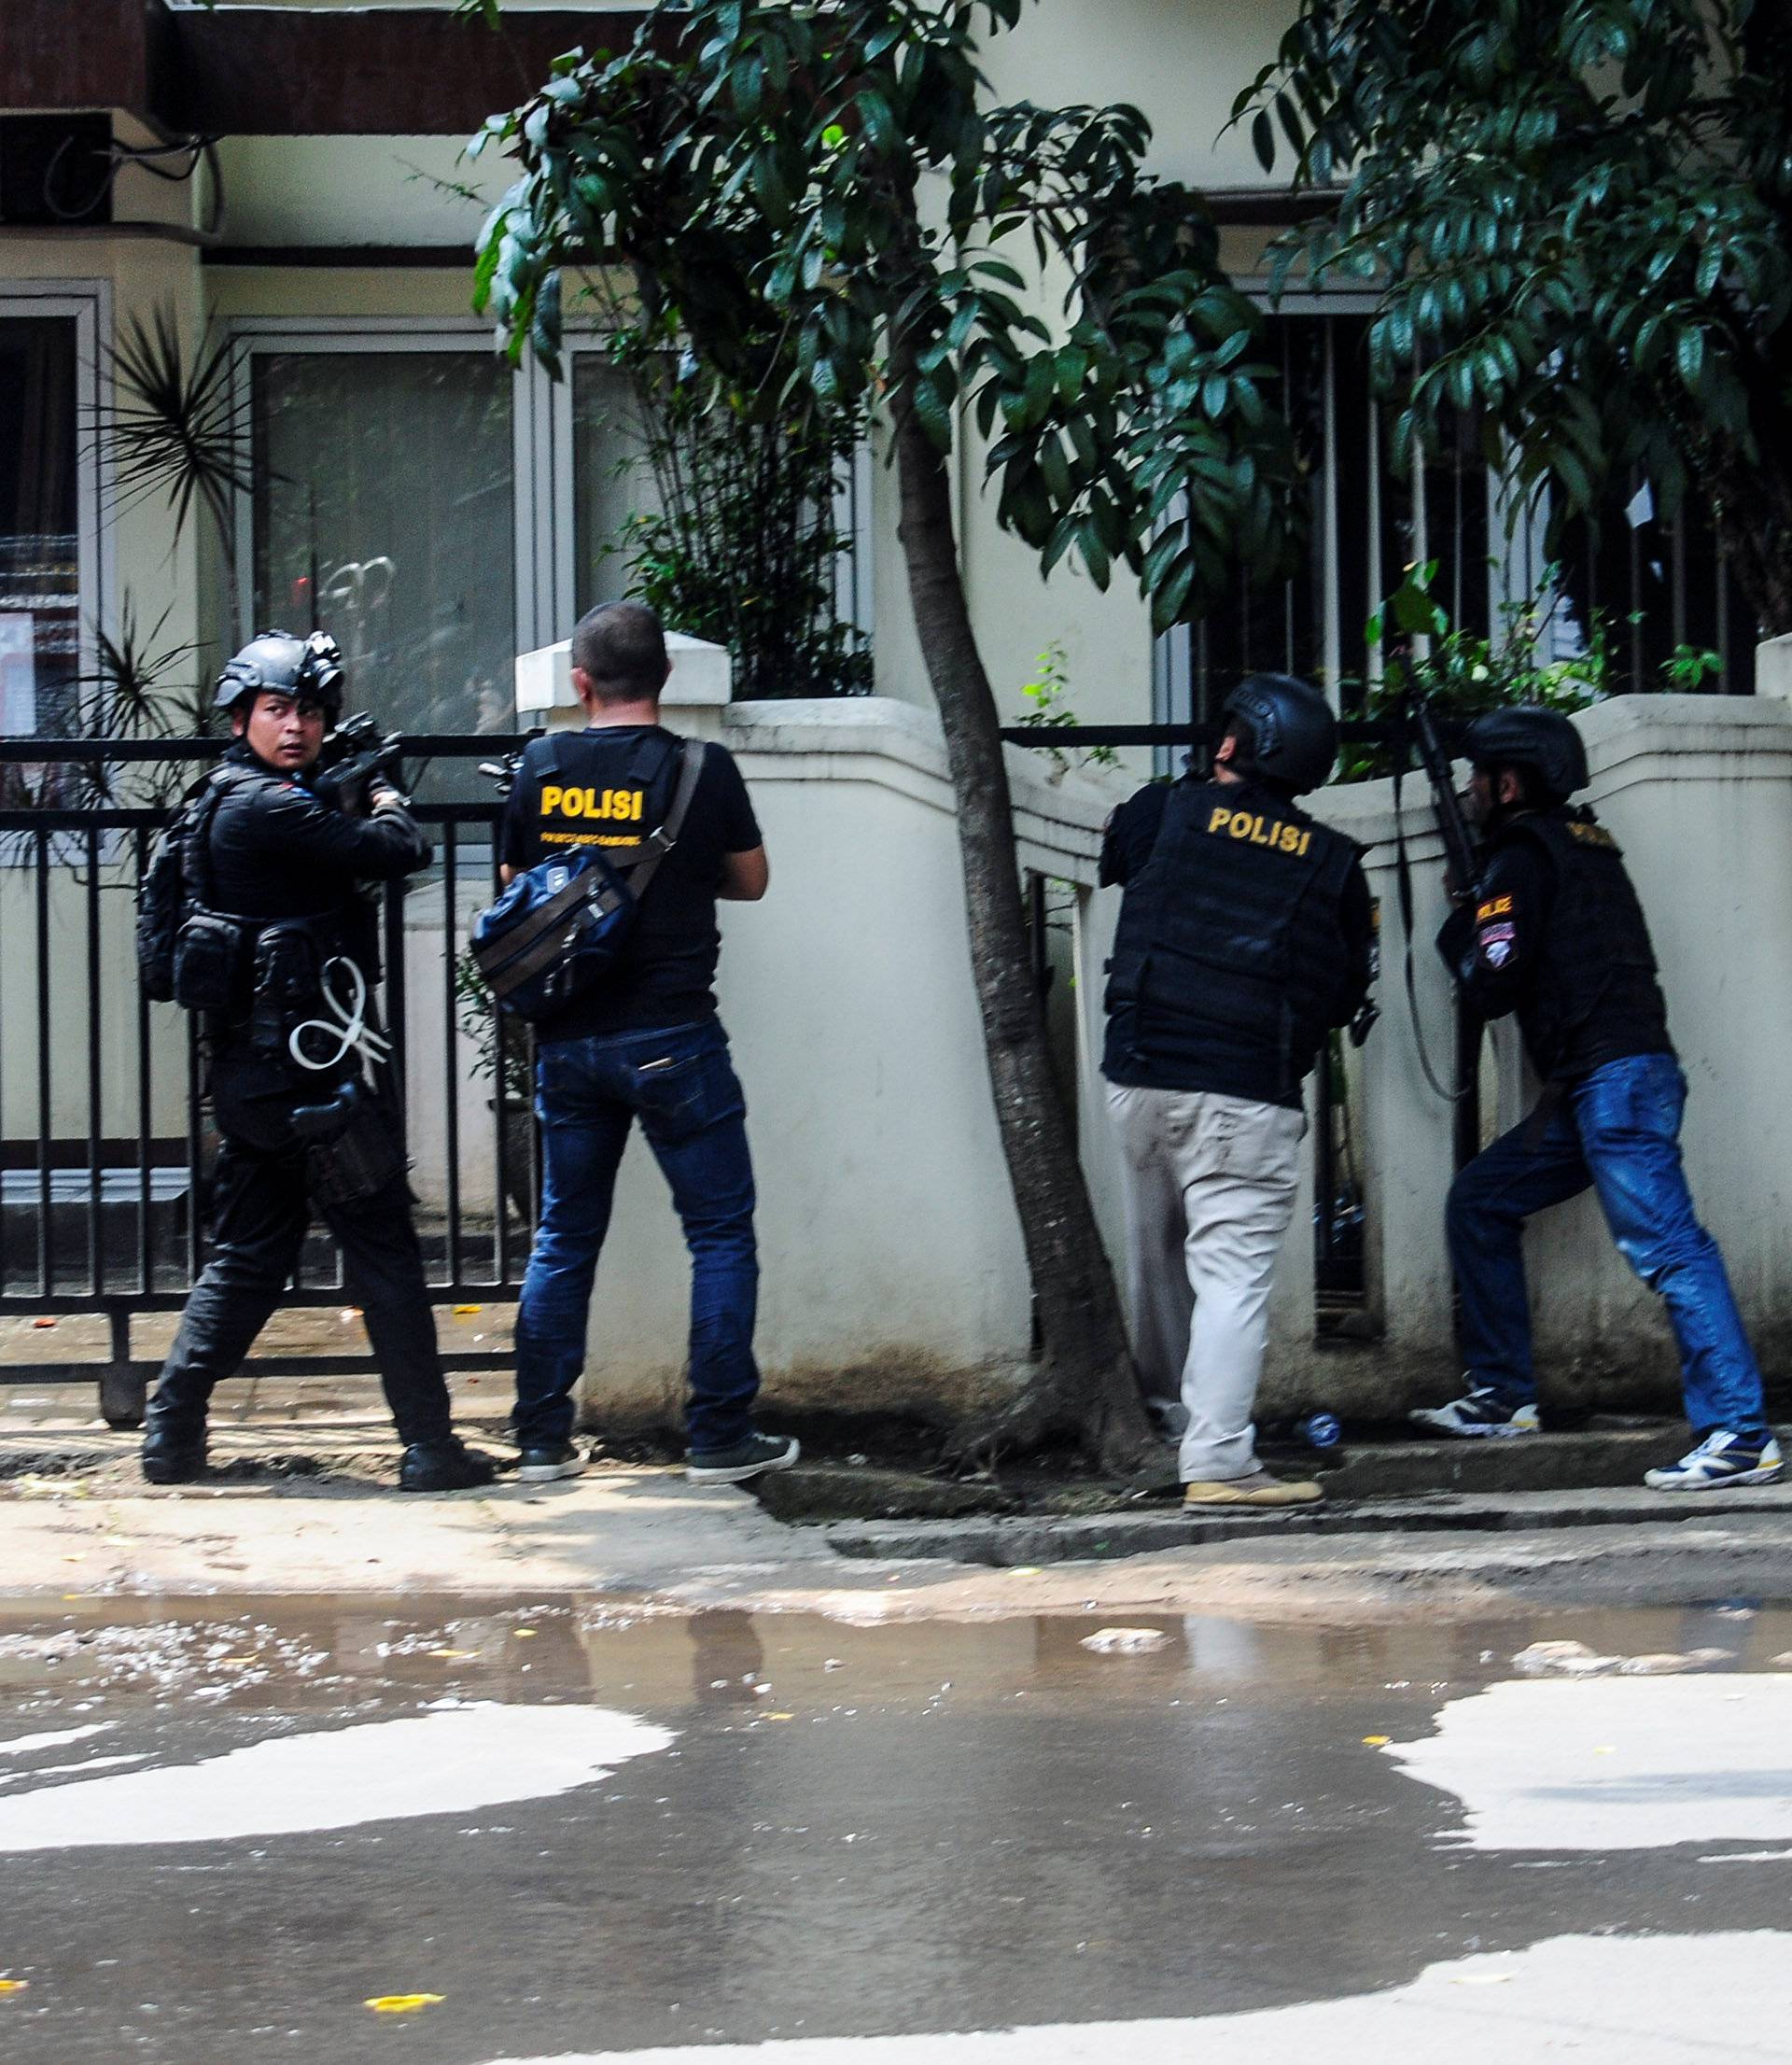 Police are seen near a local government office following an explosion in Bandung, West Java, Indonesia